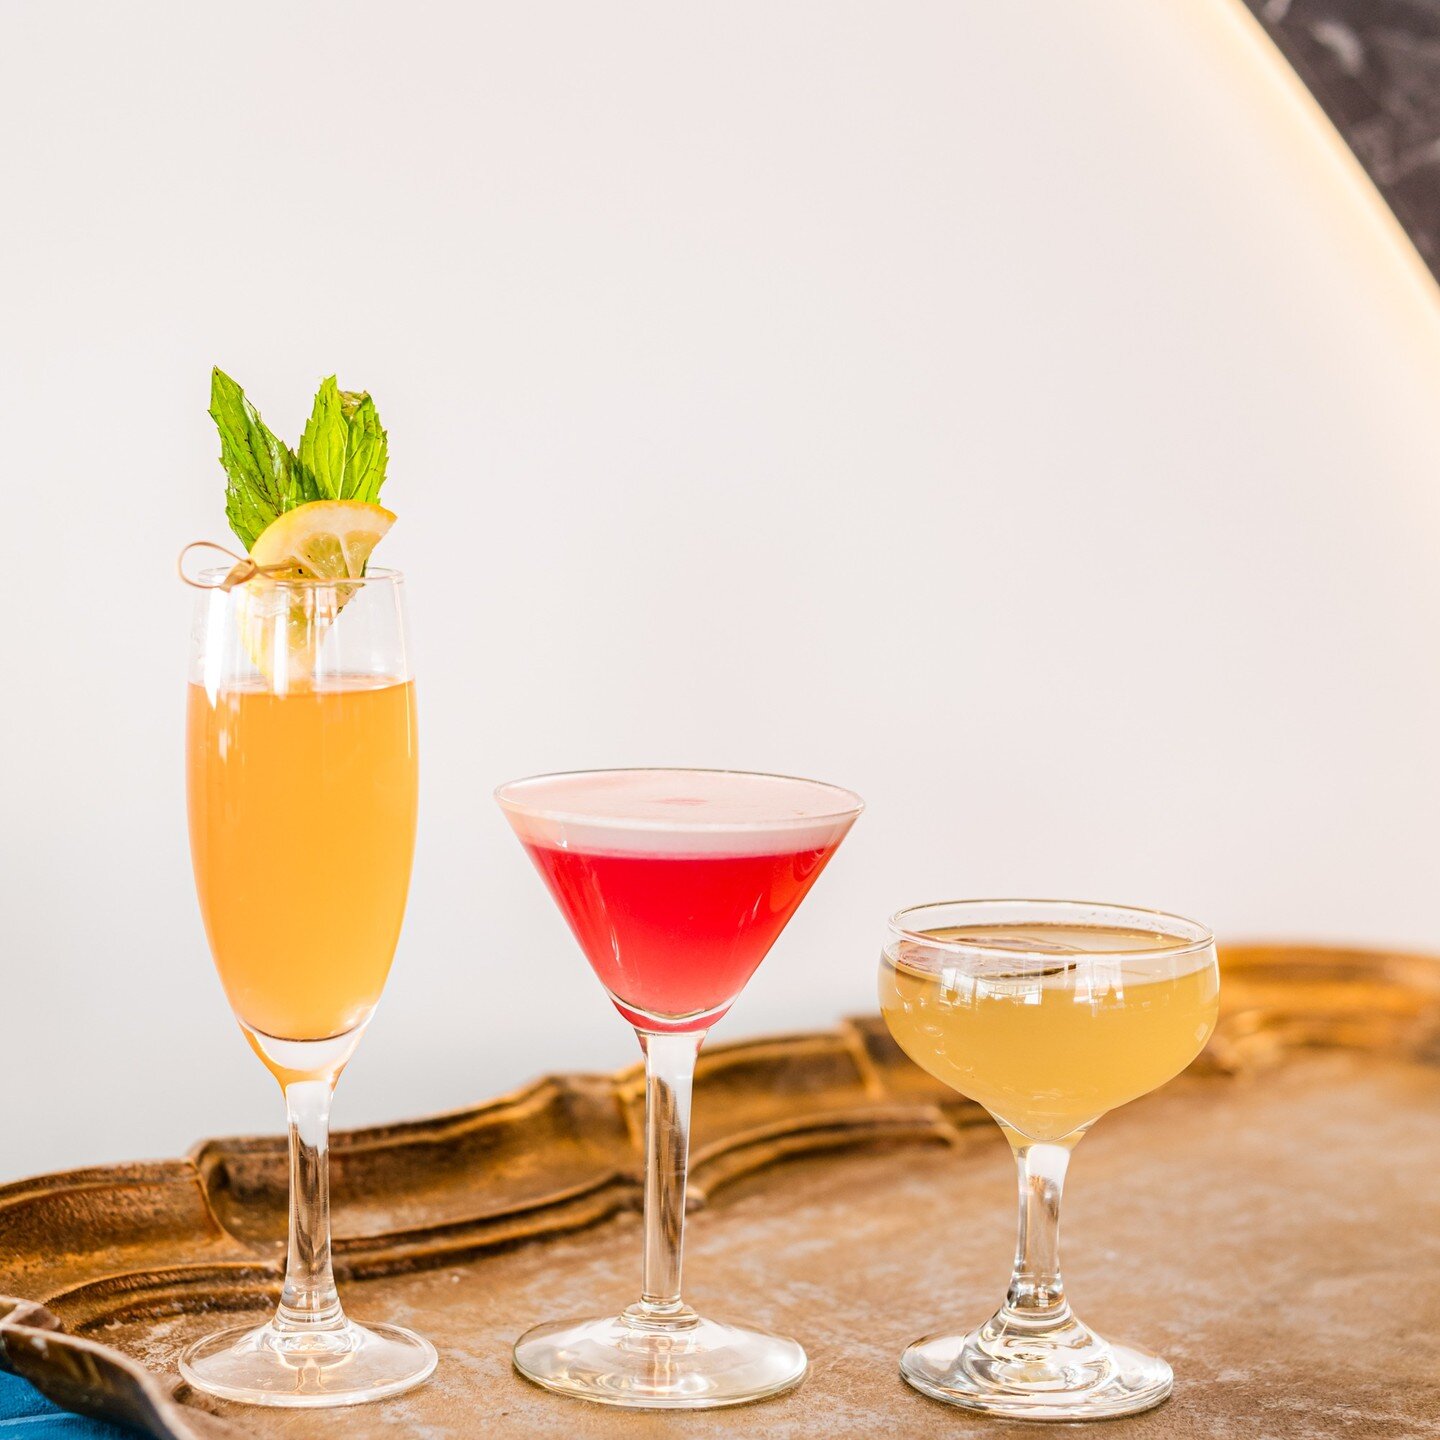 $10 mini-cocktails every Thursday at Junk Lounge 💜 Enjoy a range of spice-infused cocktails and Asian-fusion dishes that are guaranteed to excite your tastebuds.